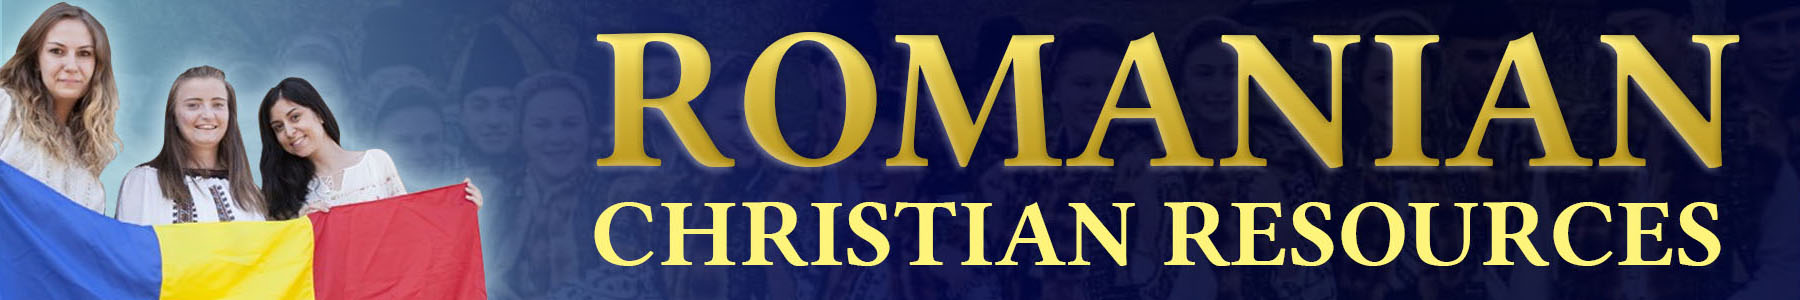 New Life in Christ Free Online Discipleship Lessons in Romanian